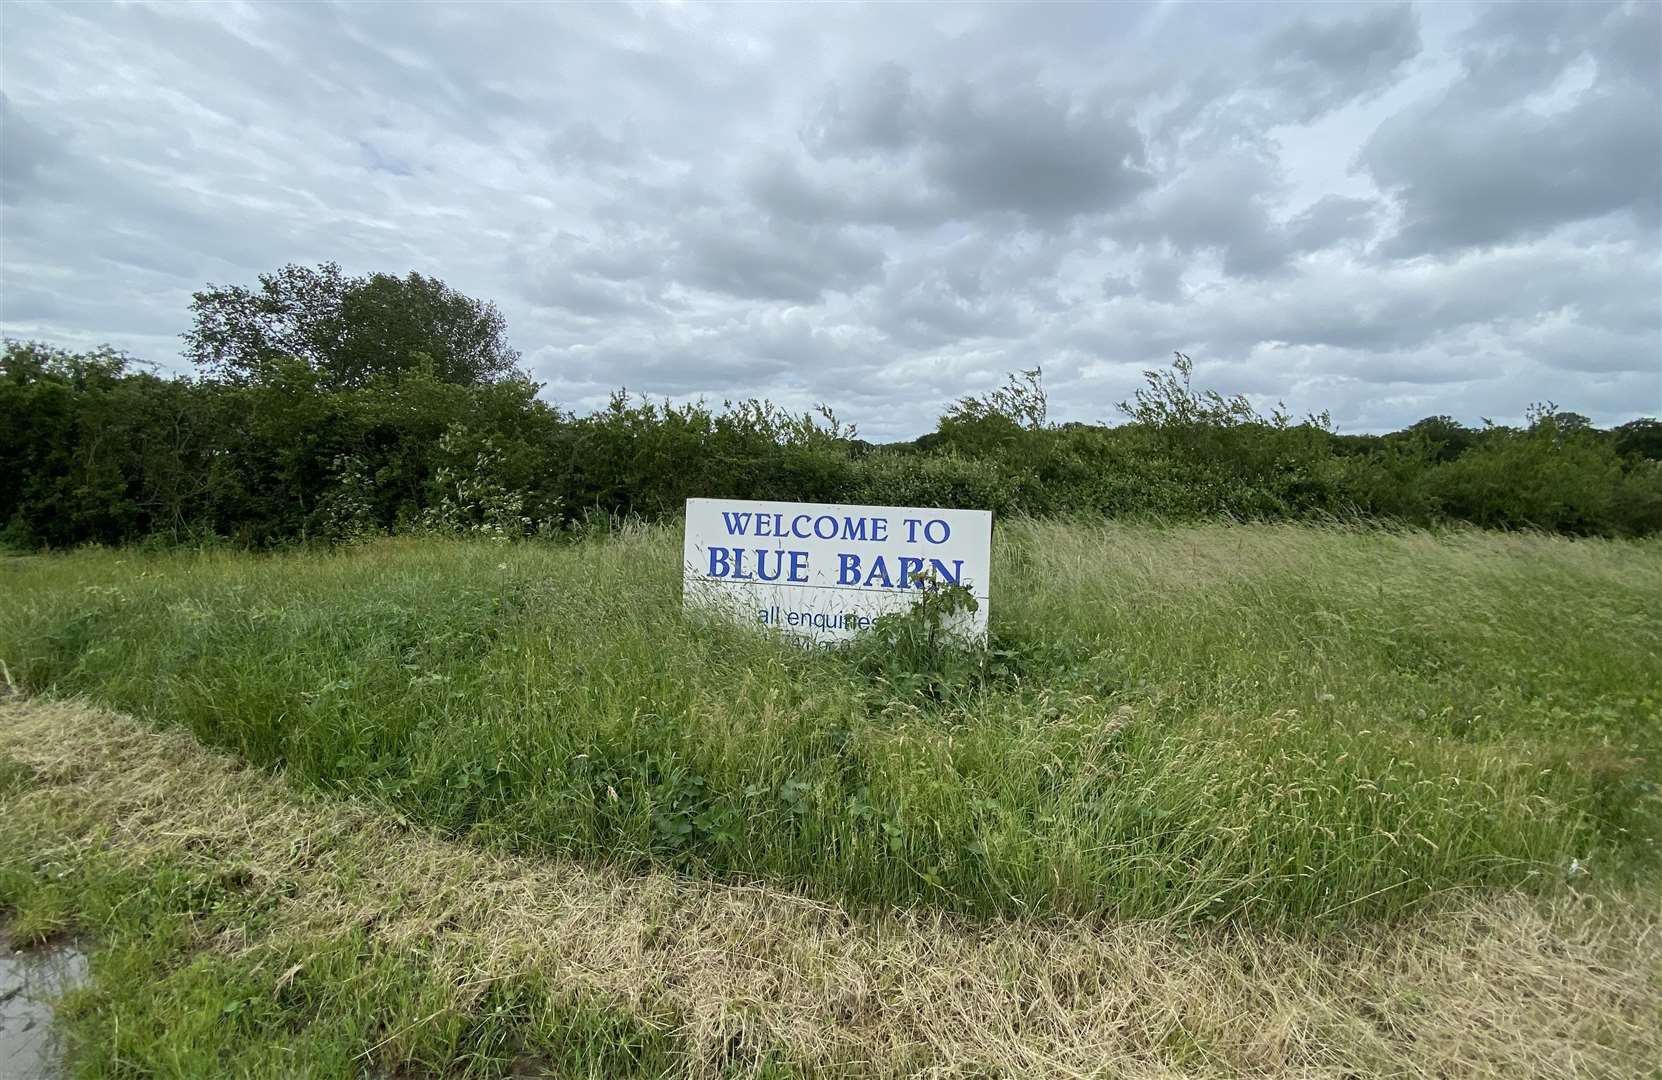 Blue Barn is described on its website as the 'biggest show centre in Kent'